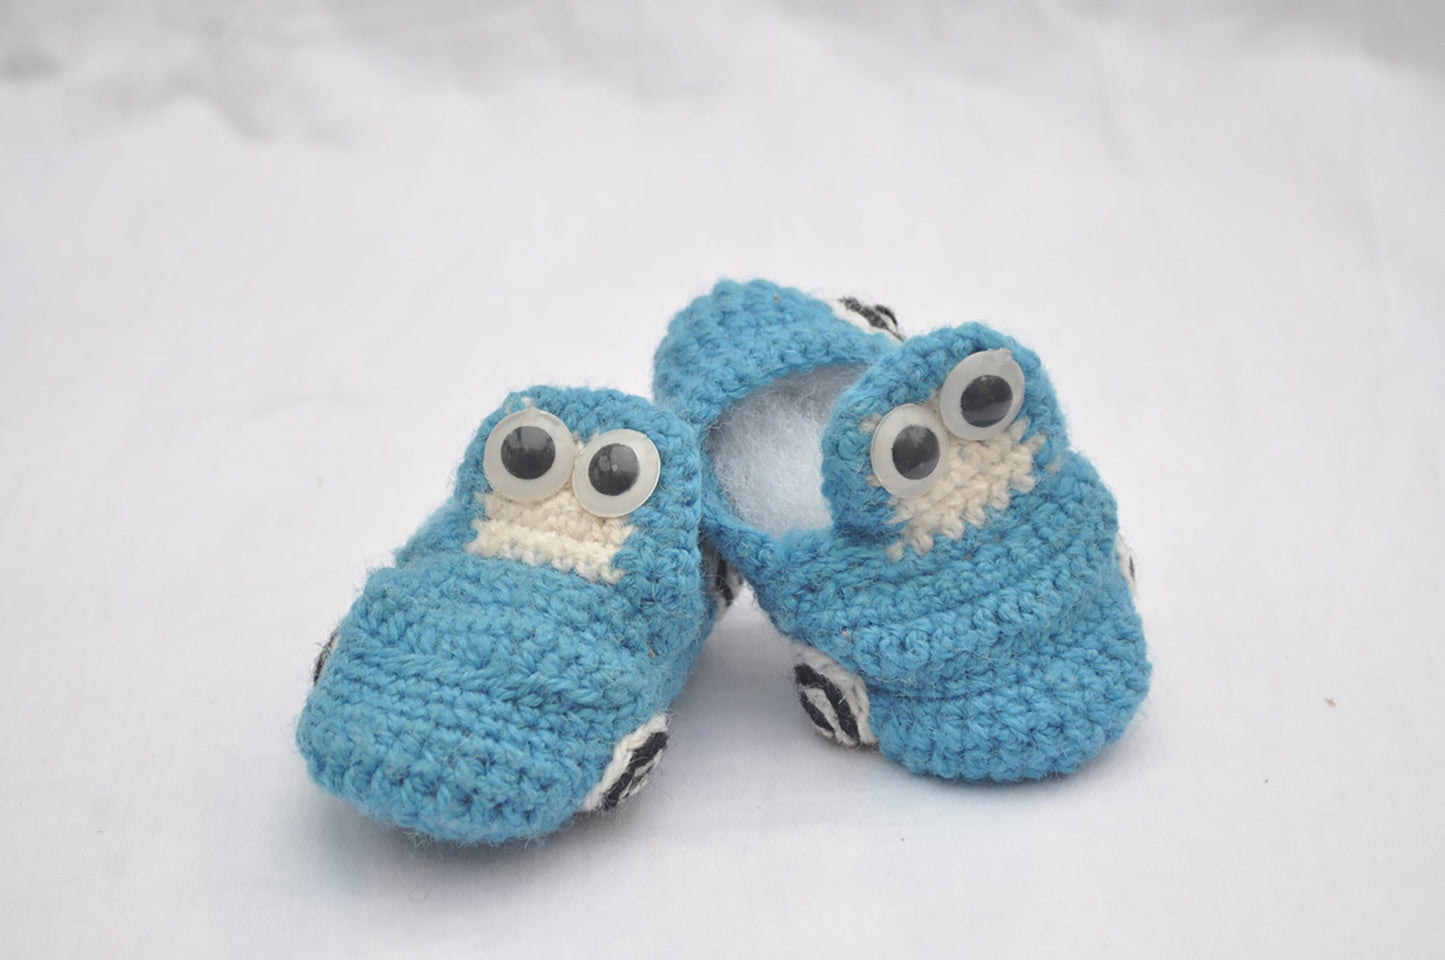 Hand Crocheted- Blue Car Shoes